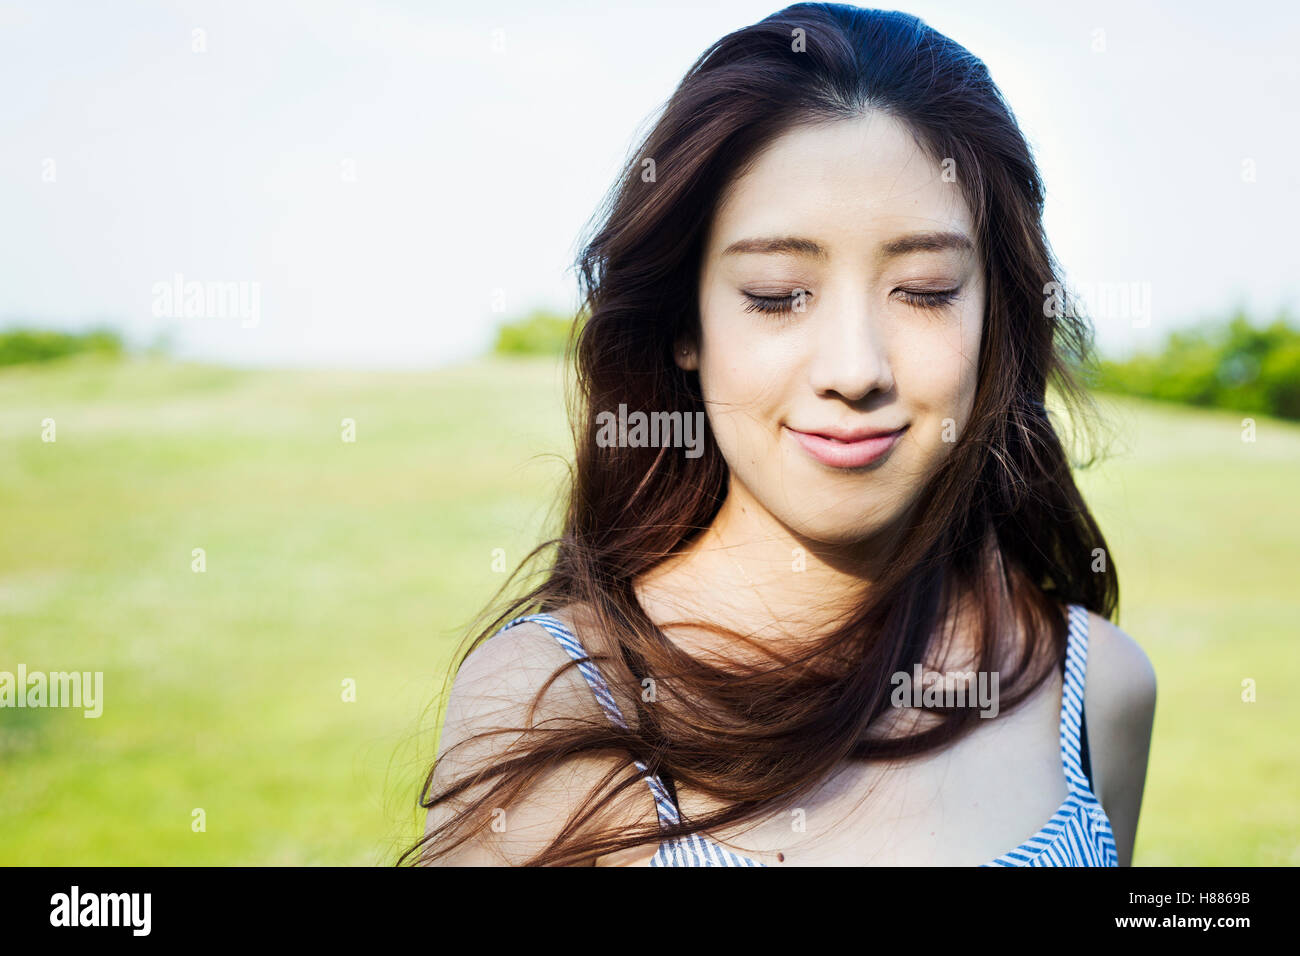 Portrait of a smiling young woman with long brown hair. Stock Photo